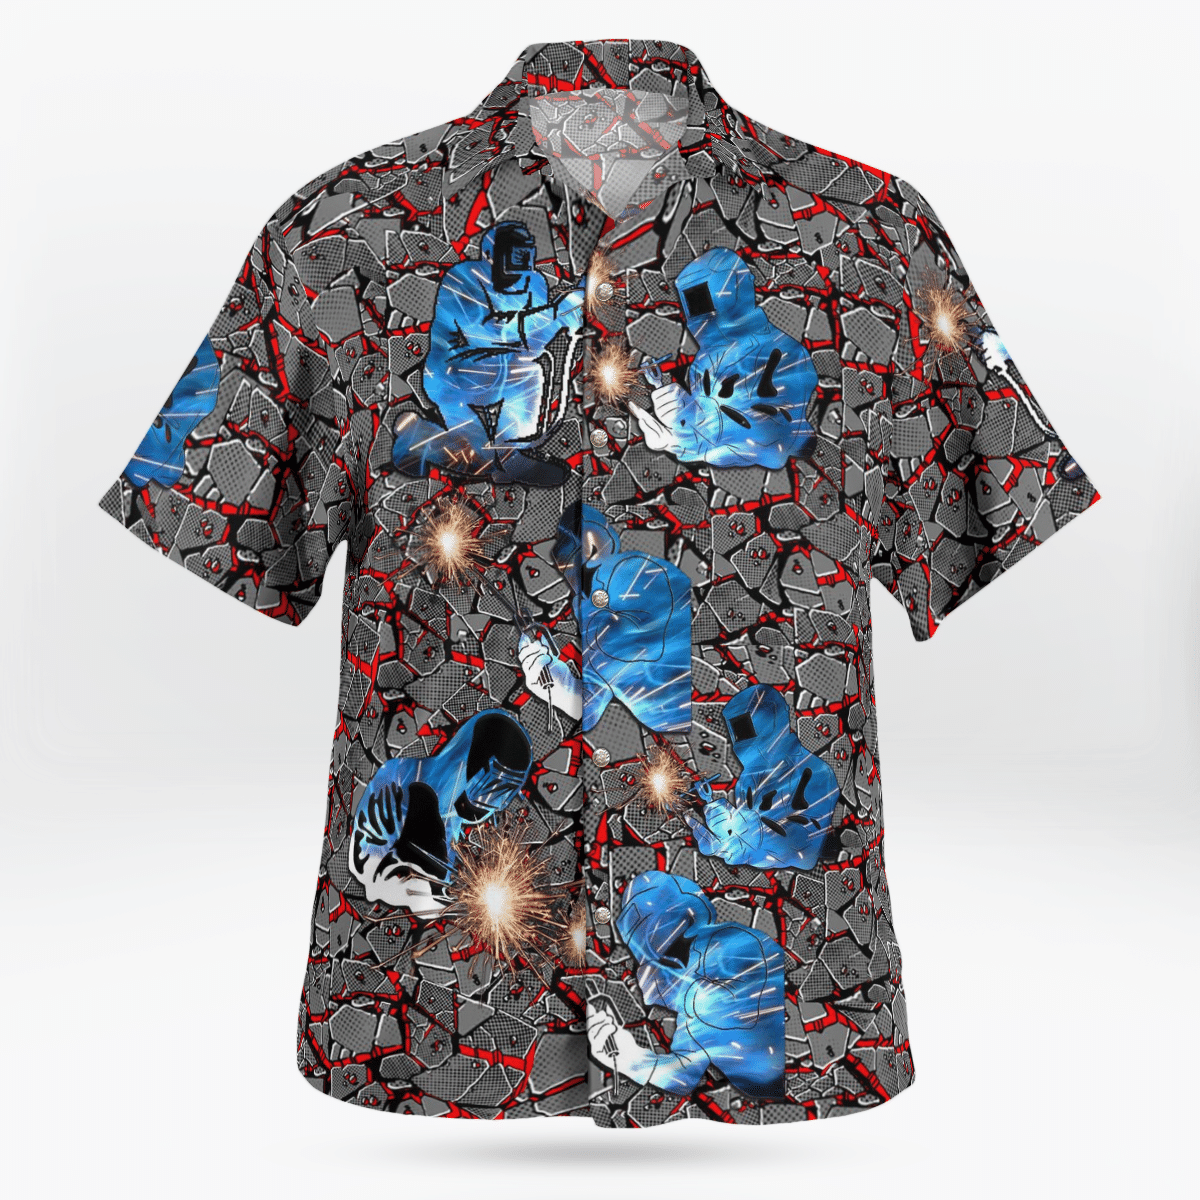 Hawaiian shirts never go out of style 90